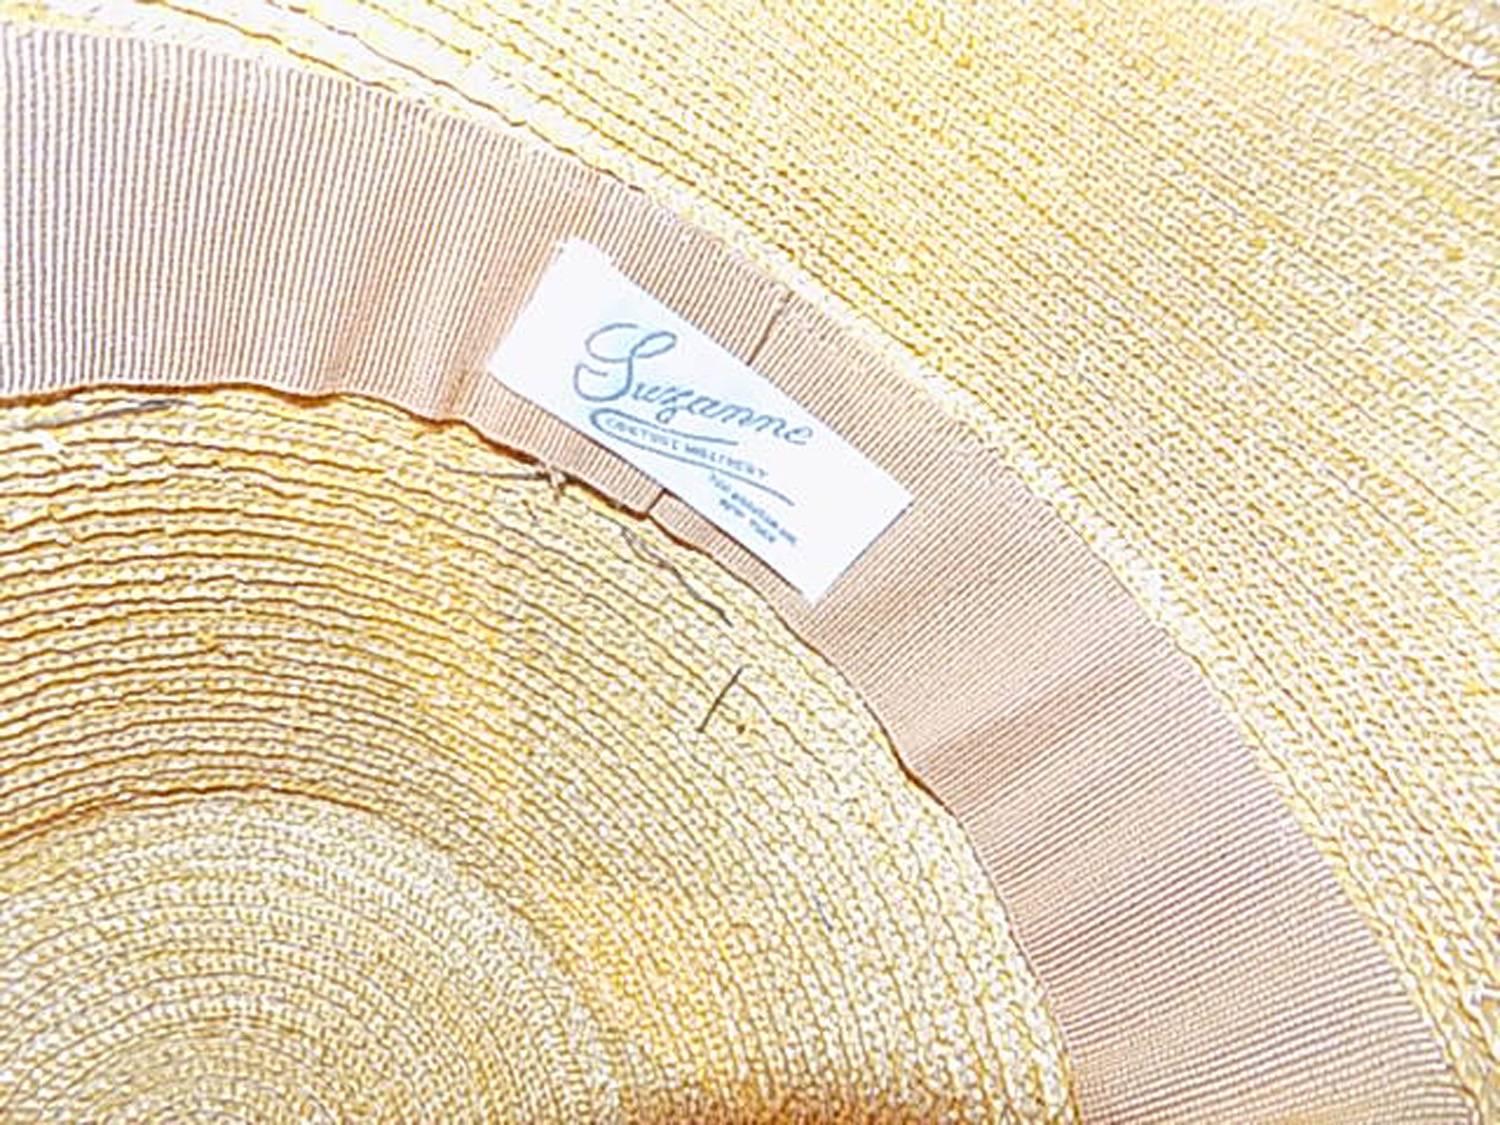 Suzanne Couture Summer Straw 